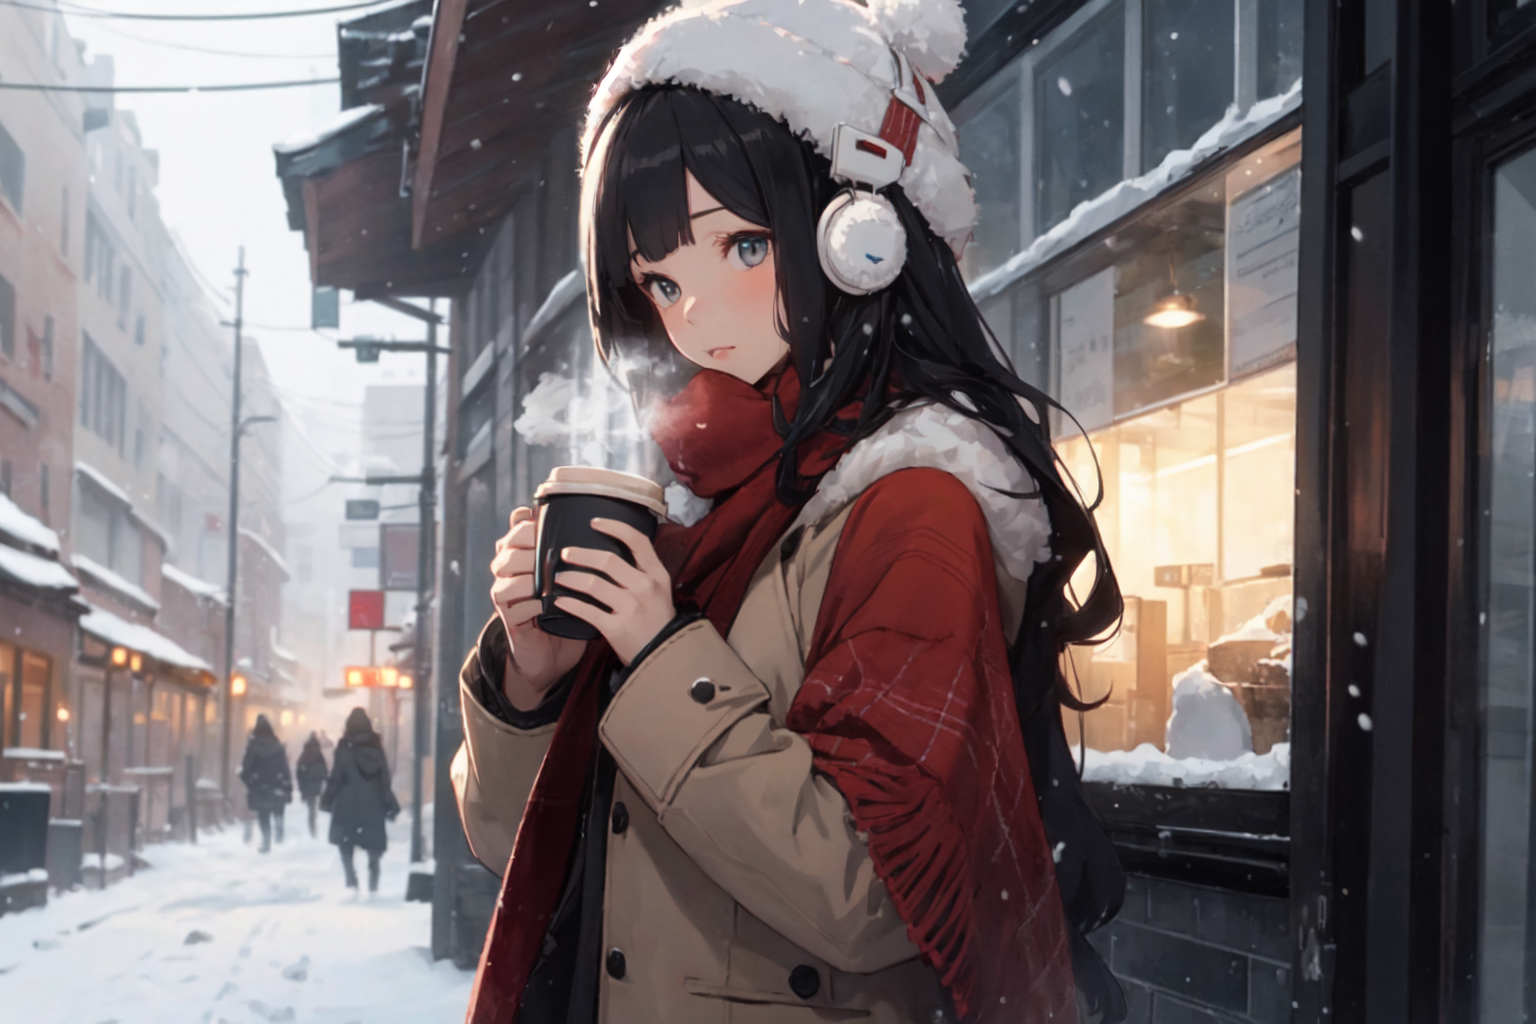 Cute girl in winter holding a cup with winter background and snow